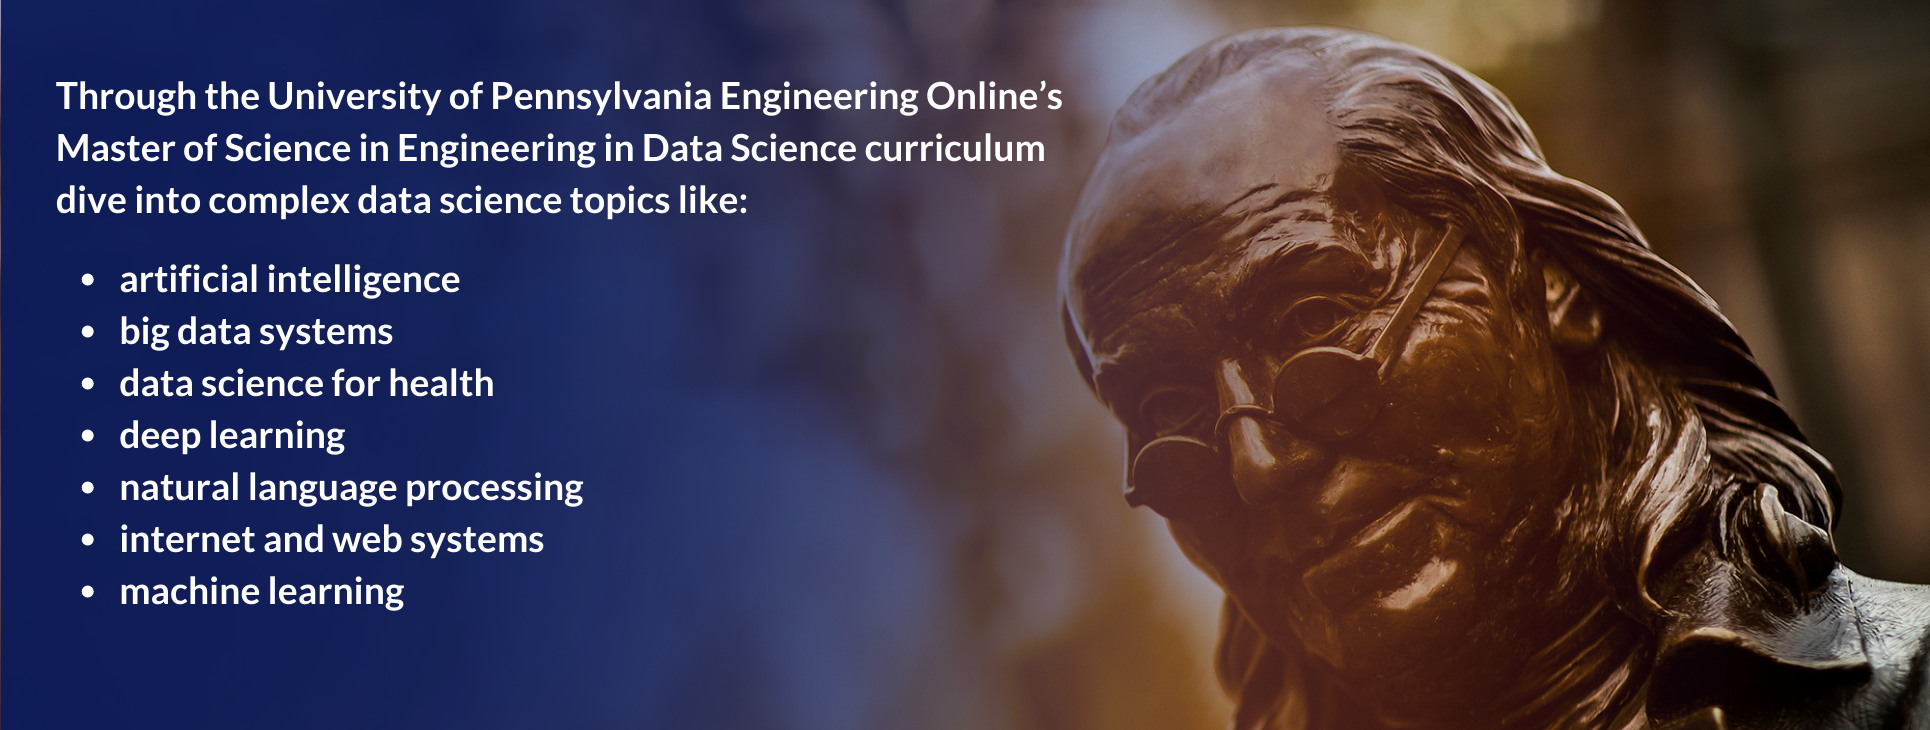 Through the University of Pennsylvania Engineering Online’s
Master of Science in Engineering in Data Science curriculum
dive into complex data science topics like: artificial intelligence, big data systems, data science for health,
deep learning,
natural language processing,
internet and web systems, and
machine learning.